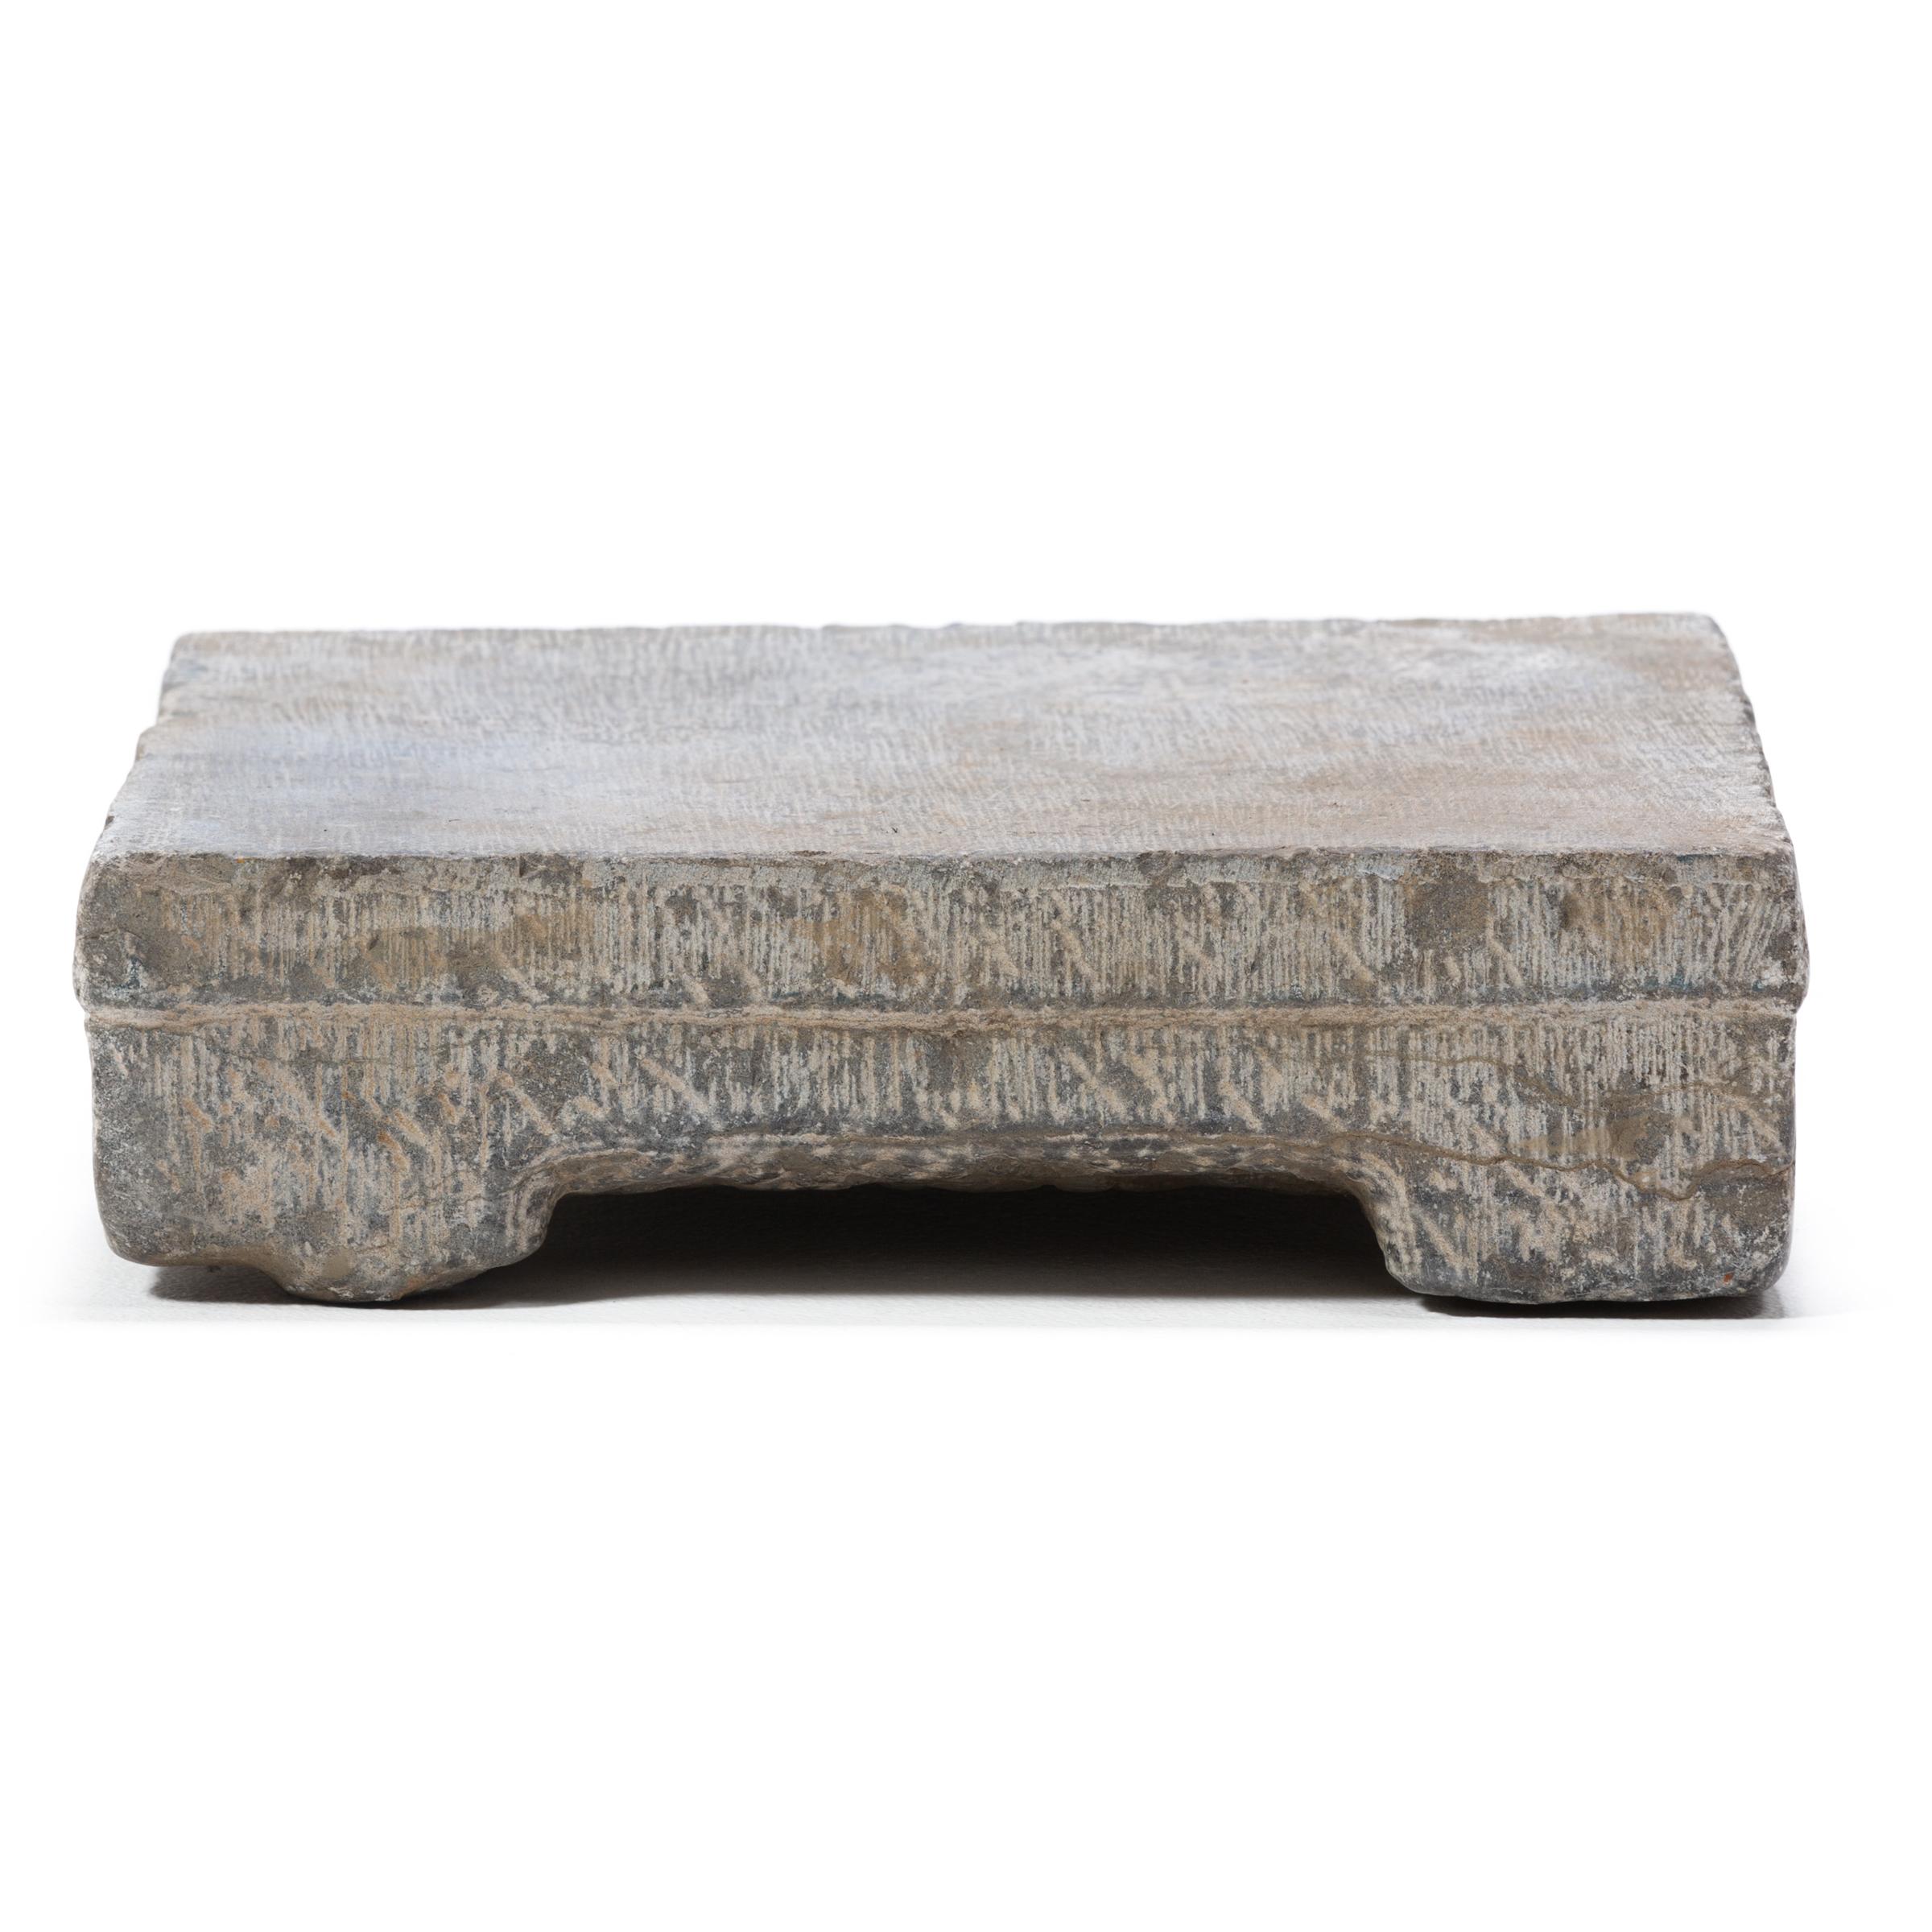 Carved in the late 19th century in northern China, this limestone washing stone would have been used by a Qing-dynasty woman for washing clothes and textiles. Used by beating wet fabrics against its smooth surface with a wooden washing stick,